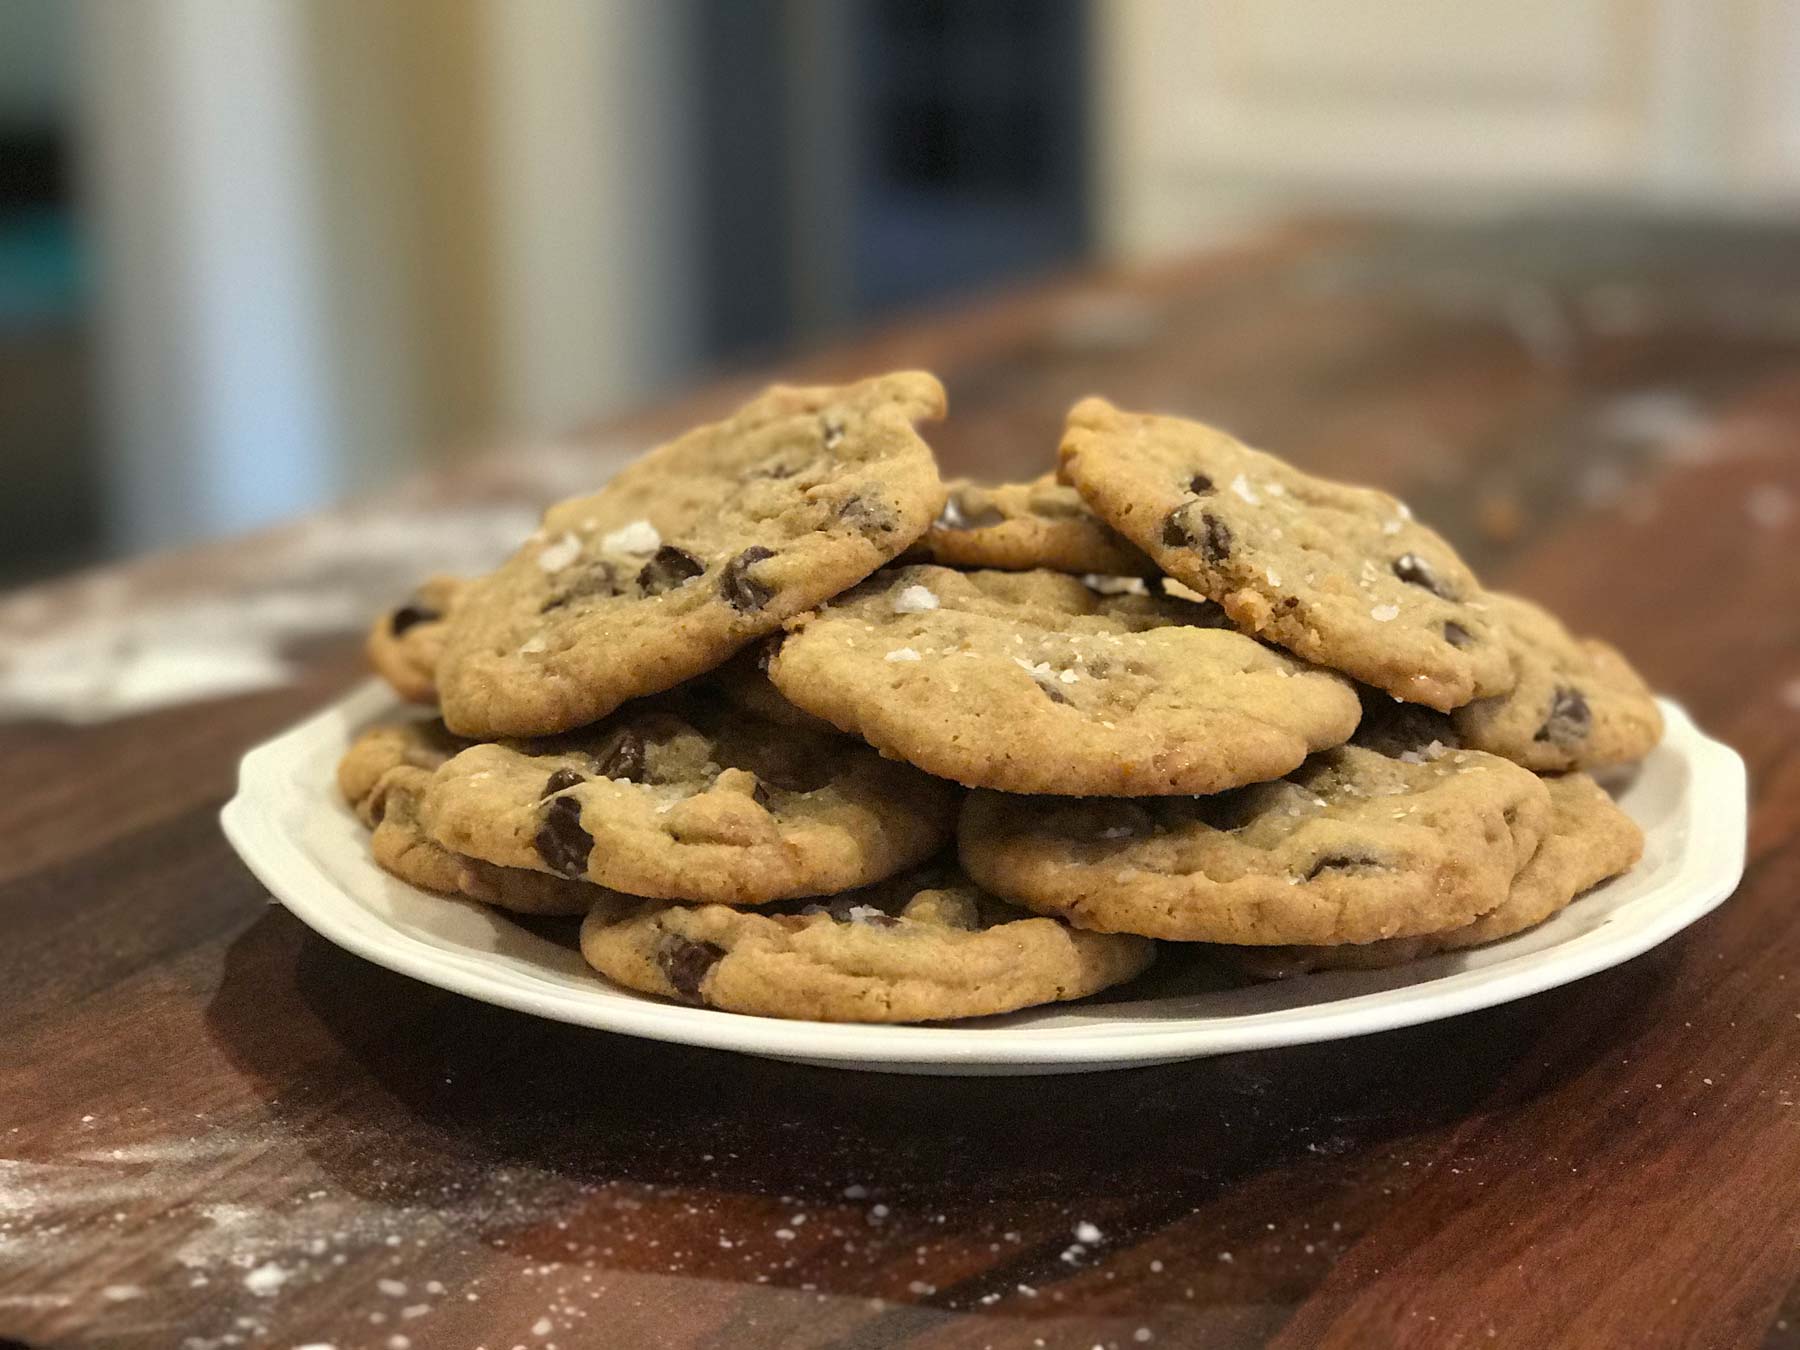 Chocolate Chip Toffee Cookies, the finished product